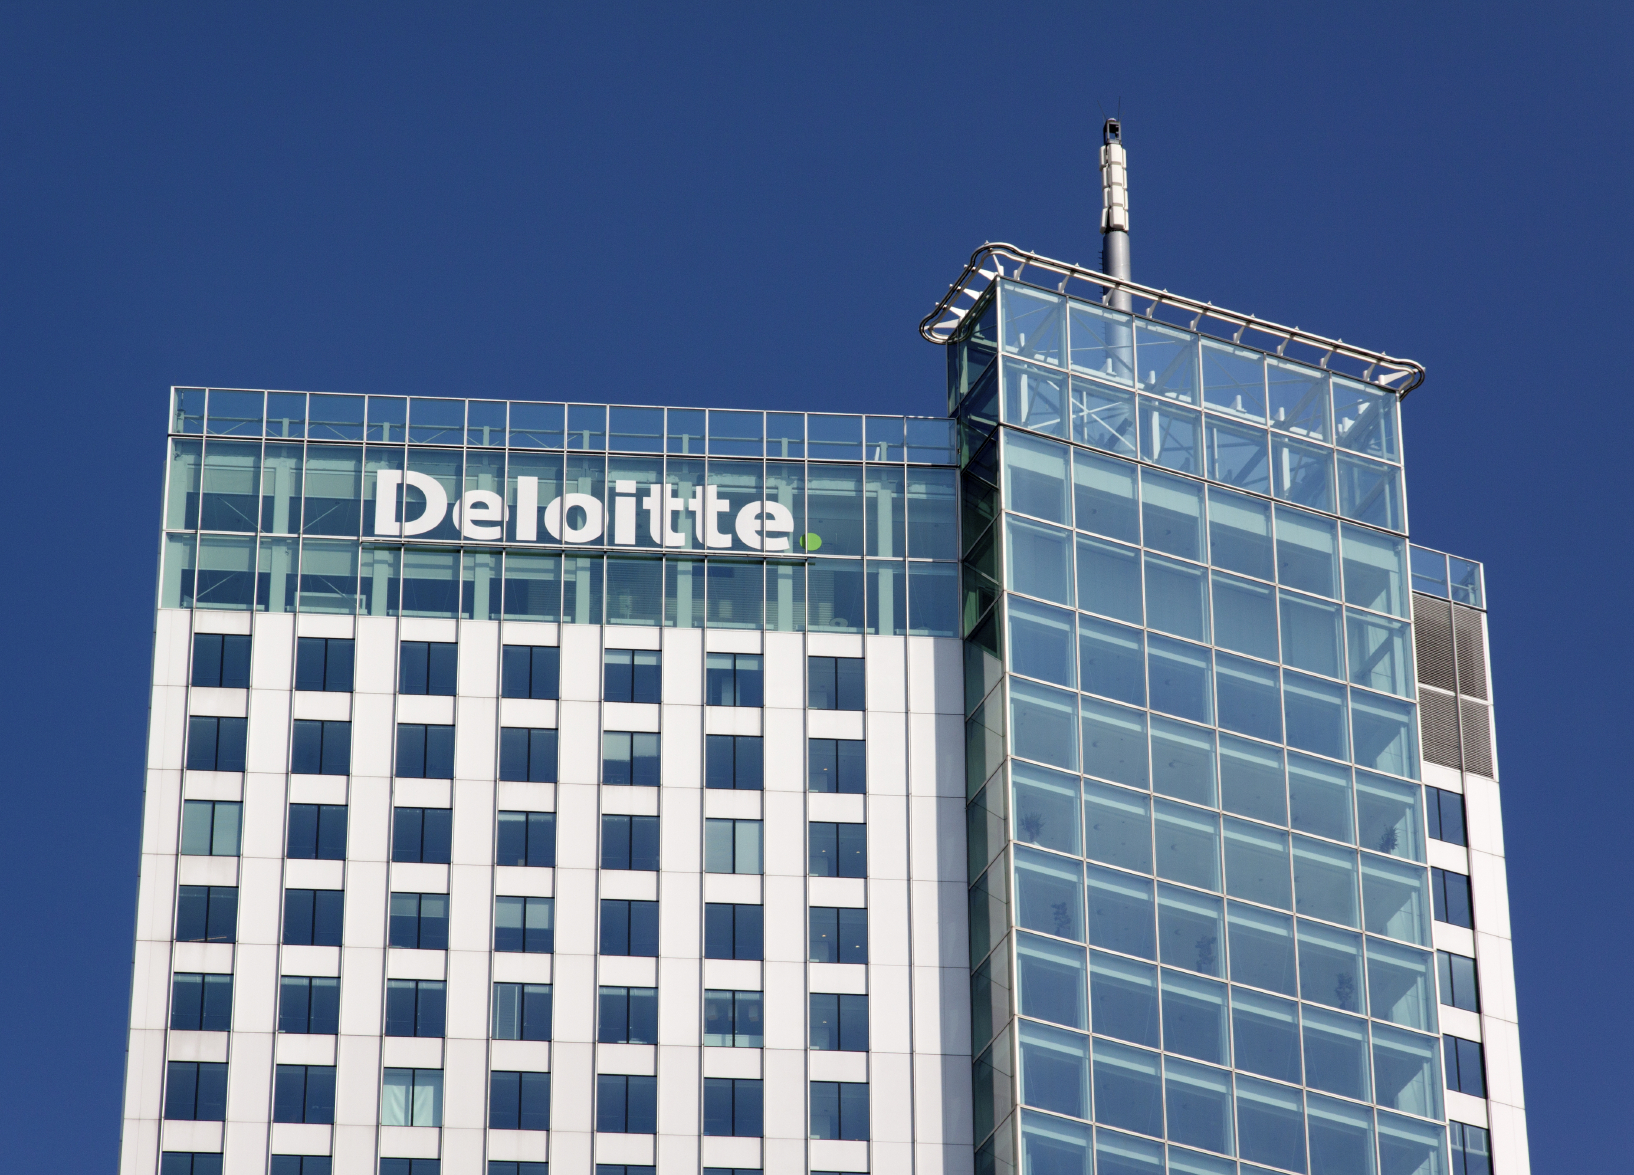 Deloitte Digital welcomes a new Spatial and Brand Experience Director